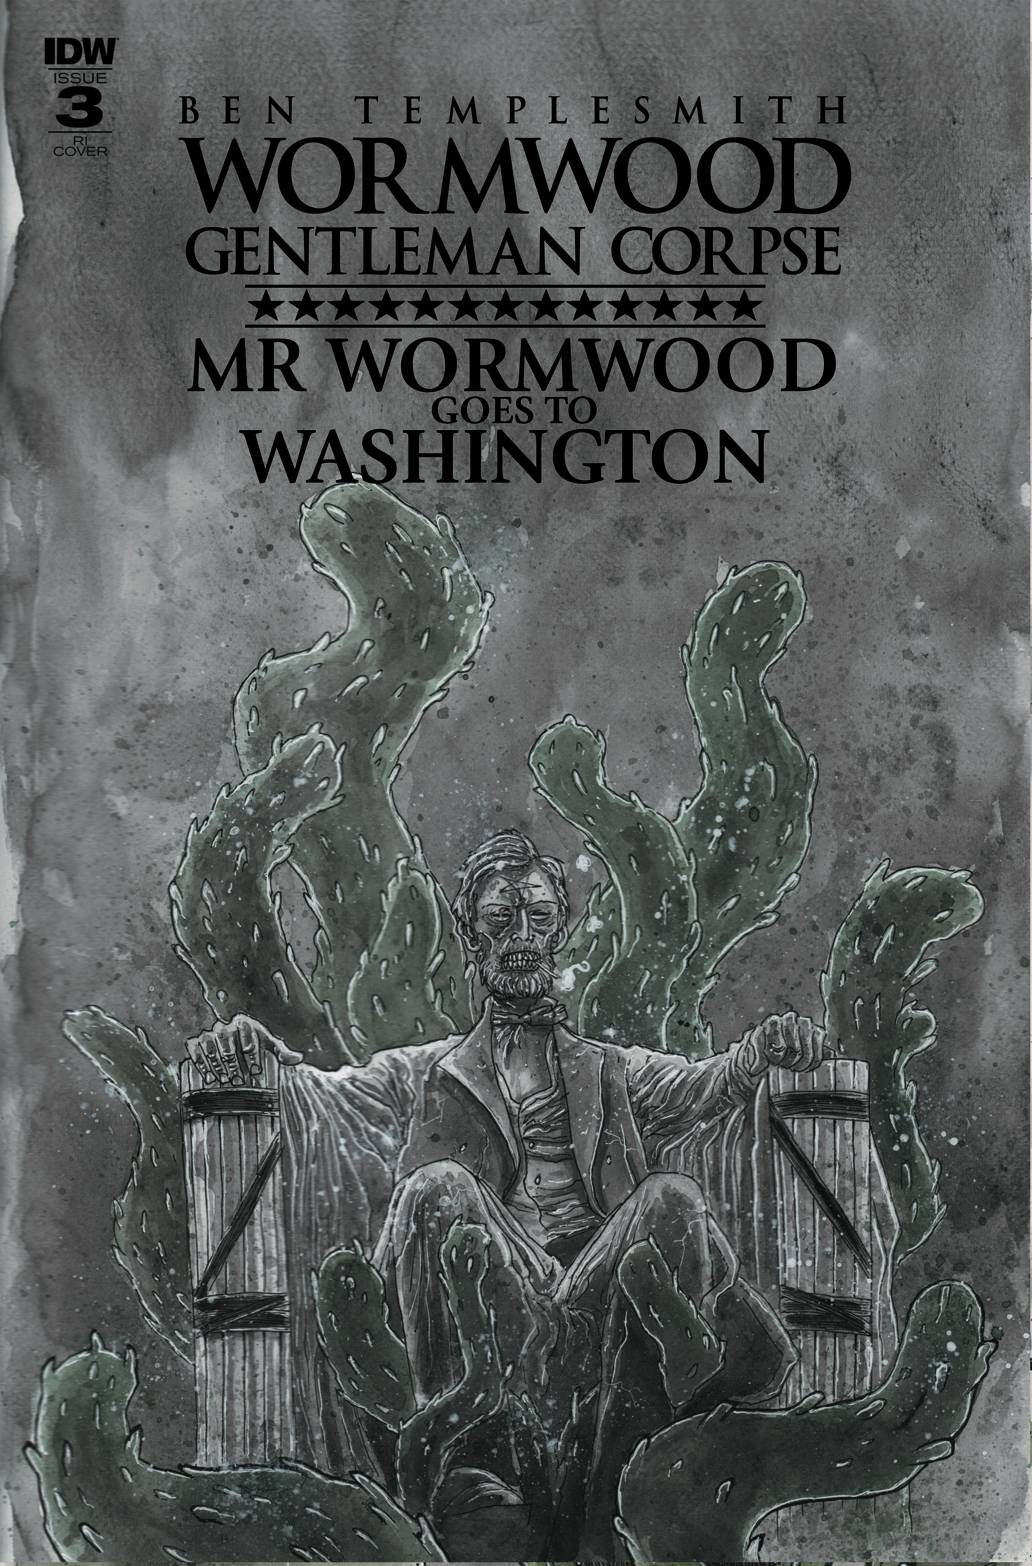 Wormwood Goes To Washington #3 1 for 10 Incentive (Of 3)